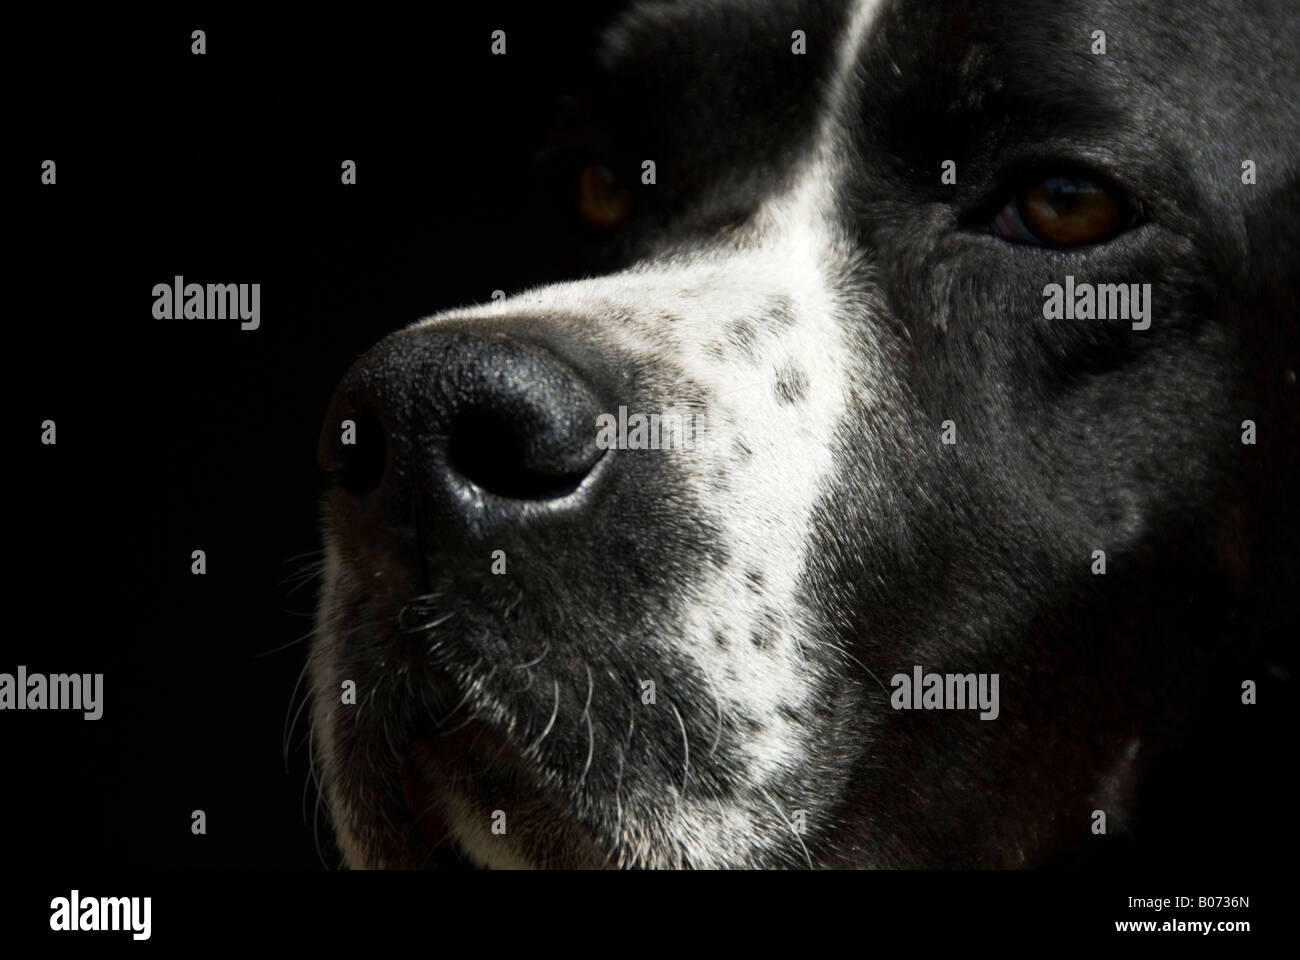 Stock photo of a close up shot of an English Pointer dogs head Stock Photo